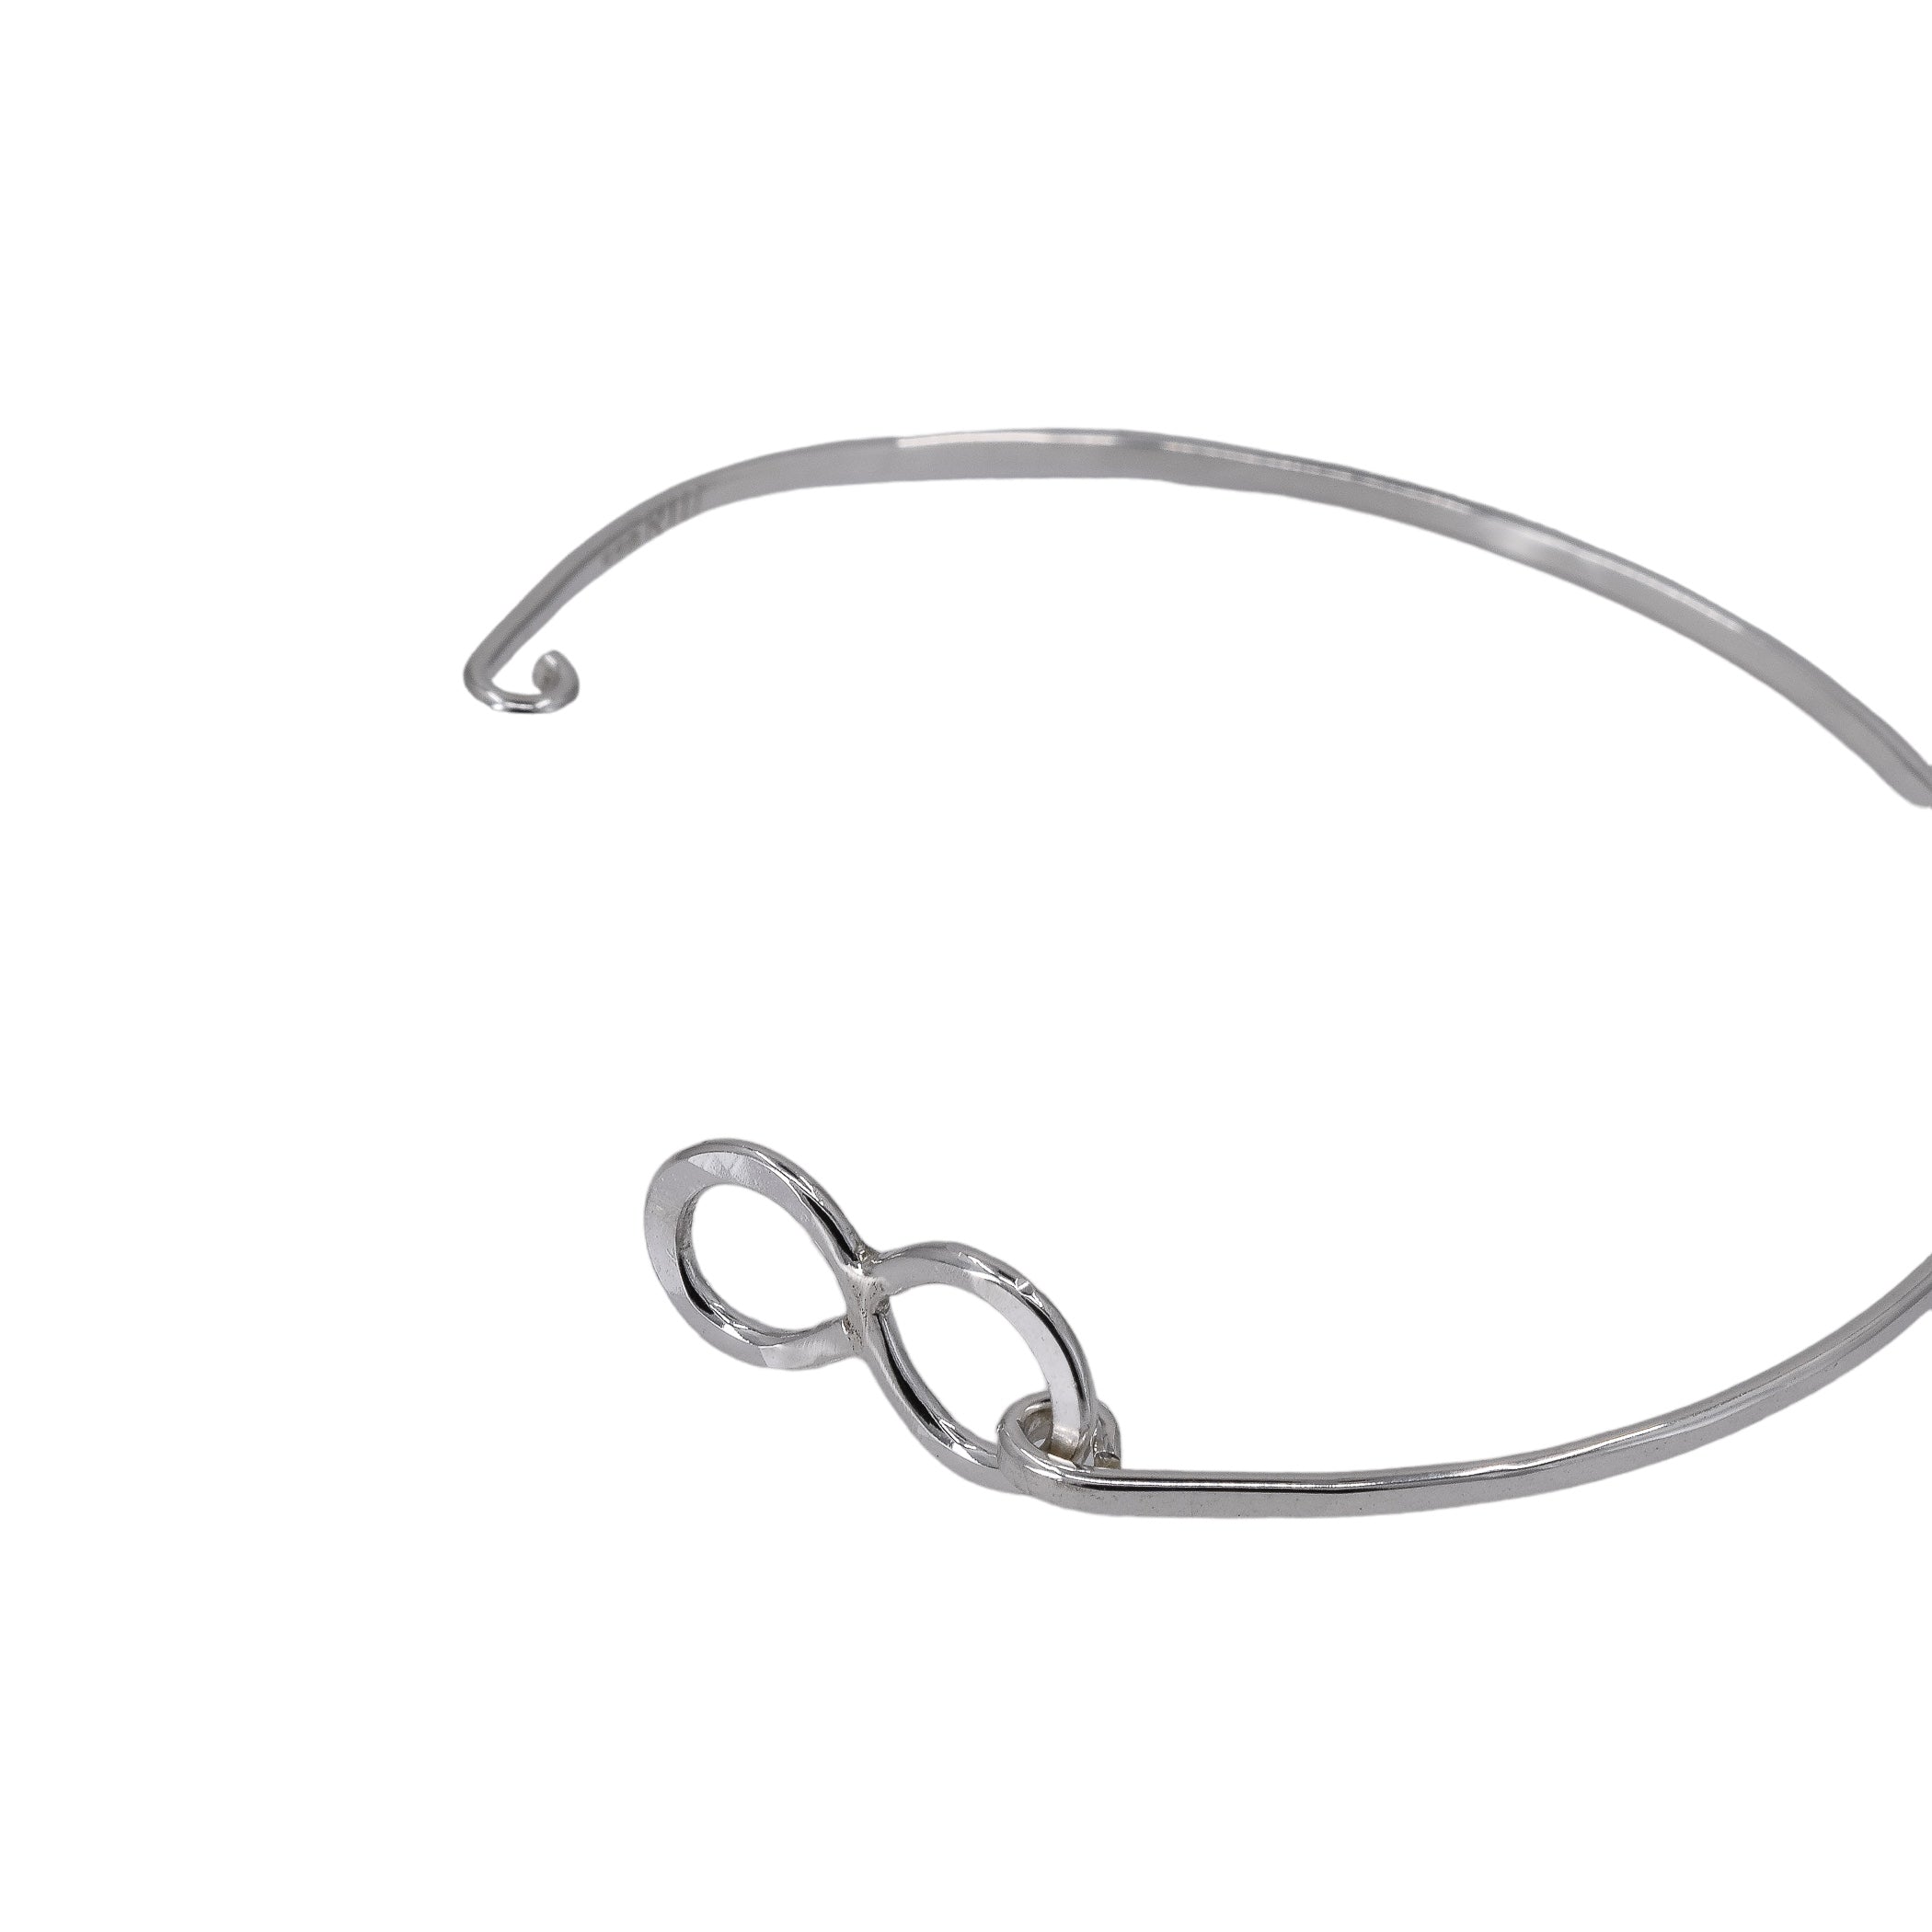 Infinity bangle bracelet in sterling silver with hinged design shown in the open position.